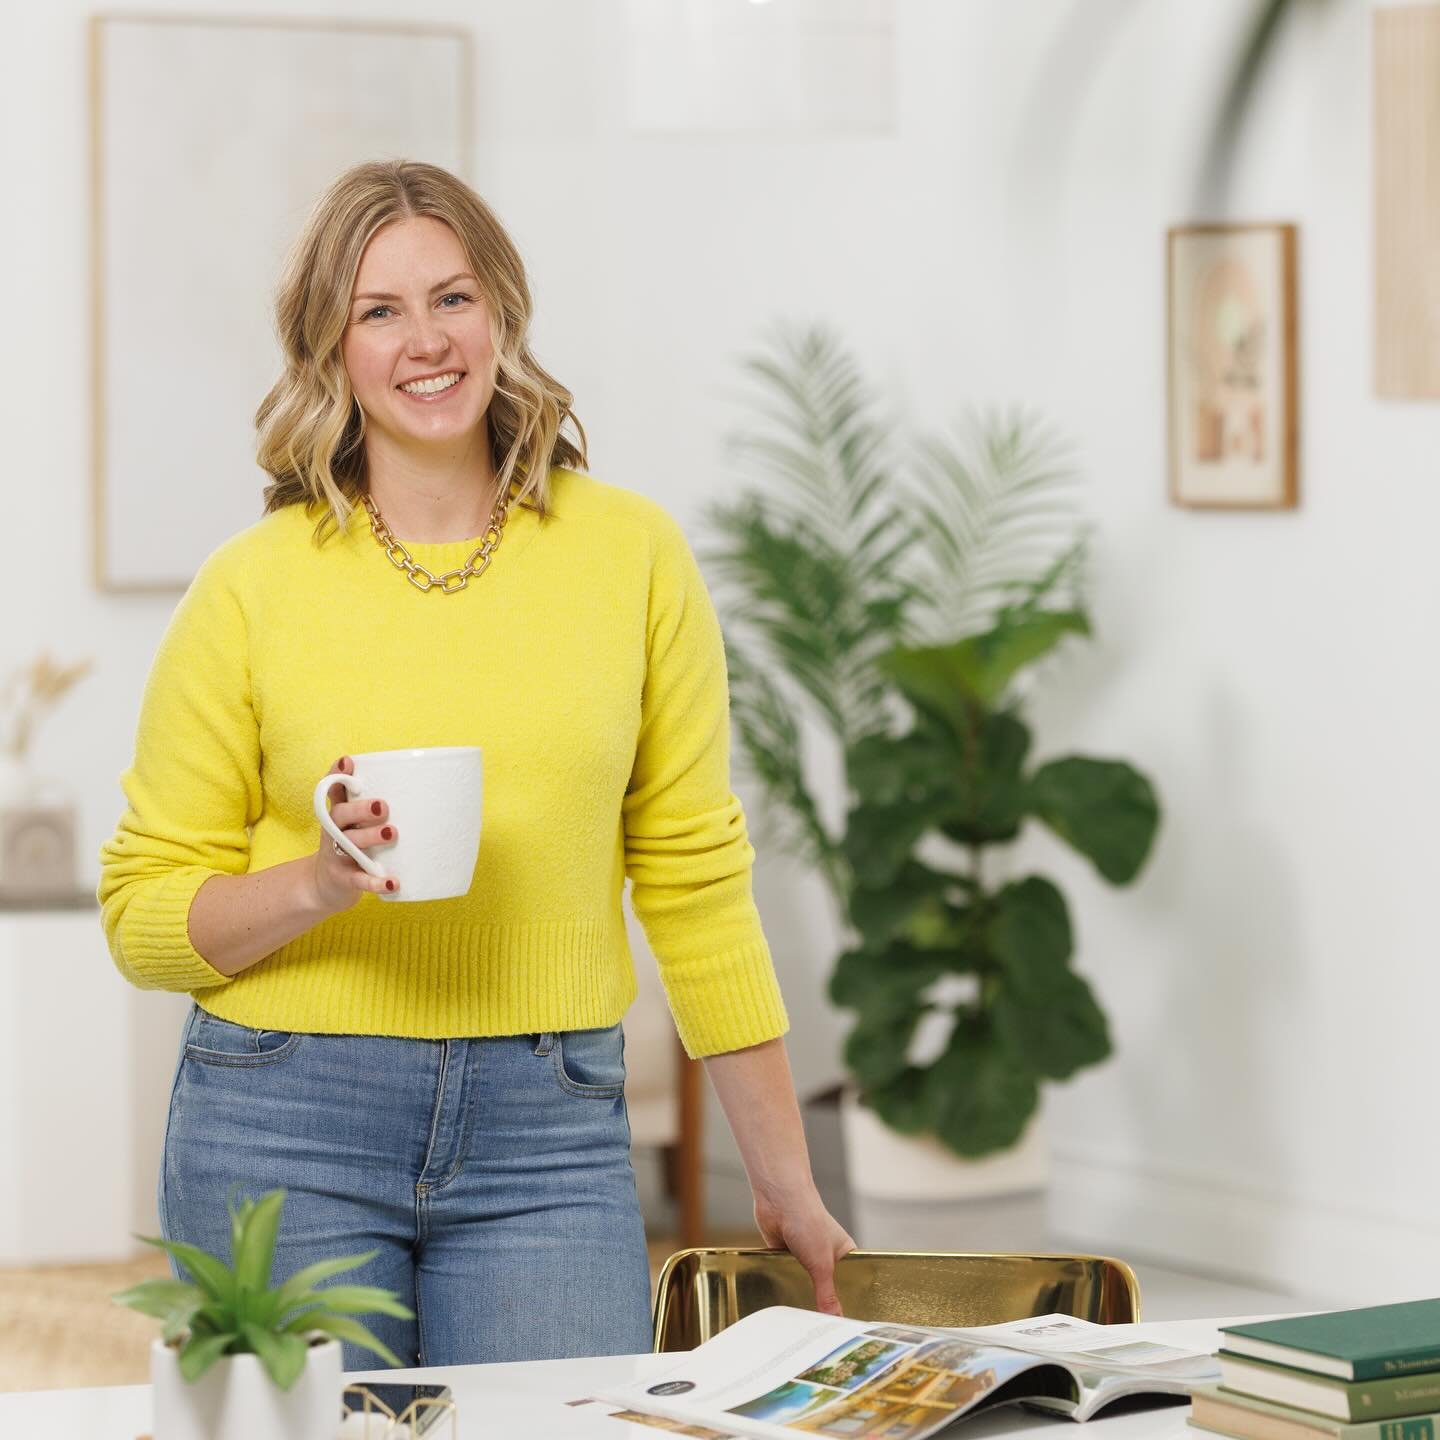 Stephanie brought her game for her lifestyle session at our studio. Love the pop of yellow. We&rsquo;ve designed our studio to combine headshot sessions with lifestyle. #lifestylephotography #twincitiesphotographer #brandingsession #headshotphotograp